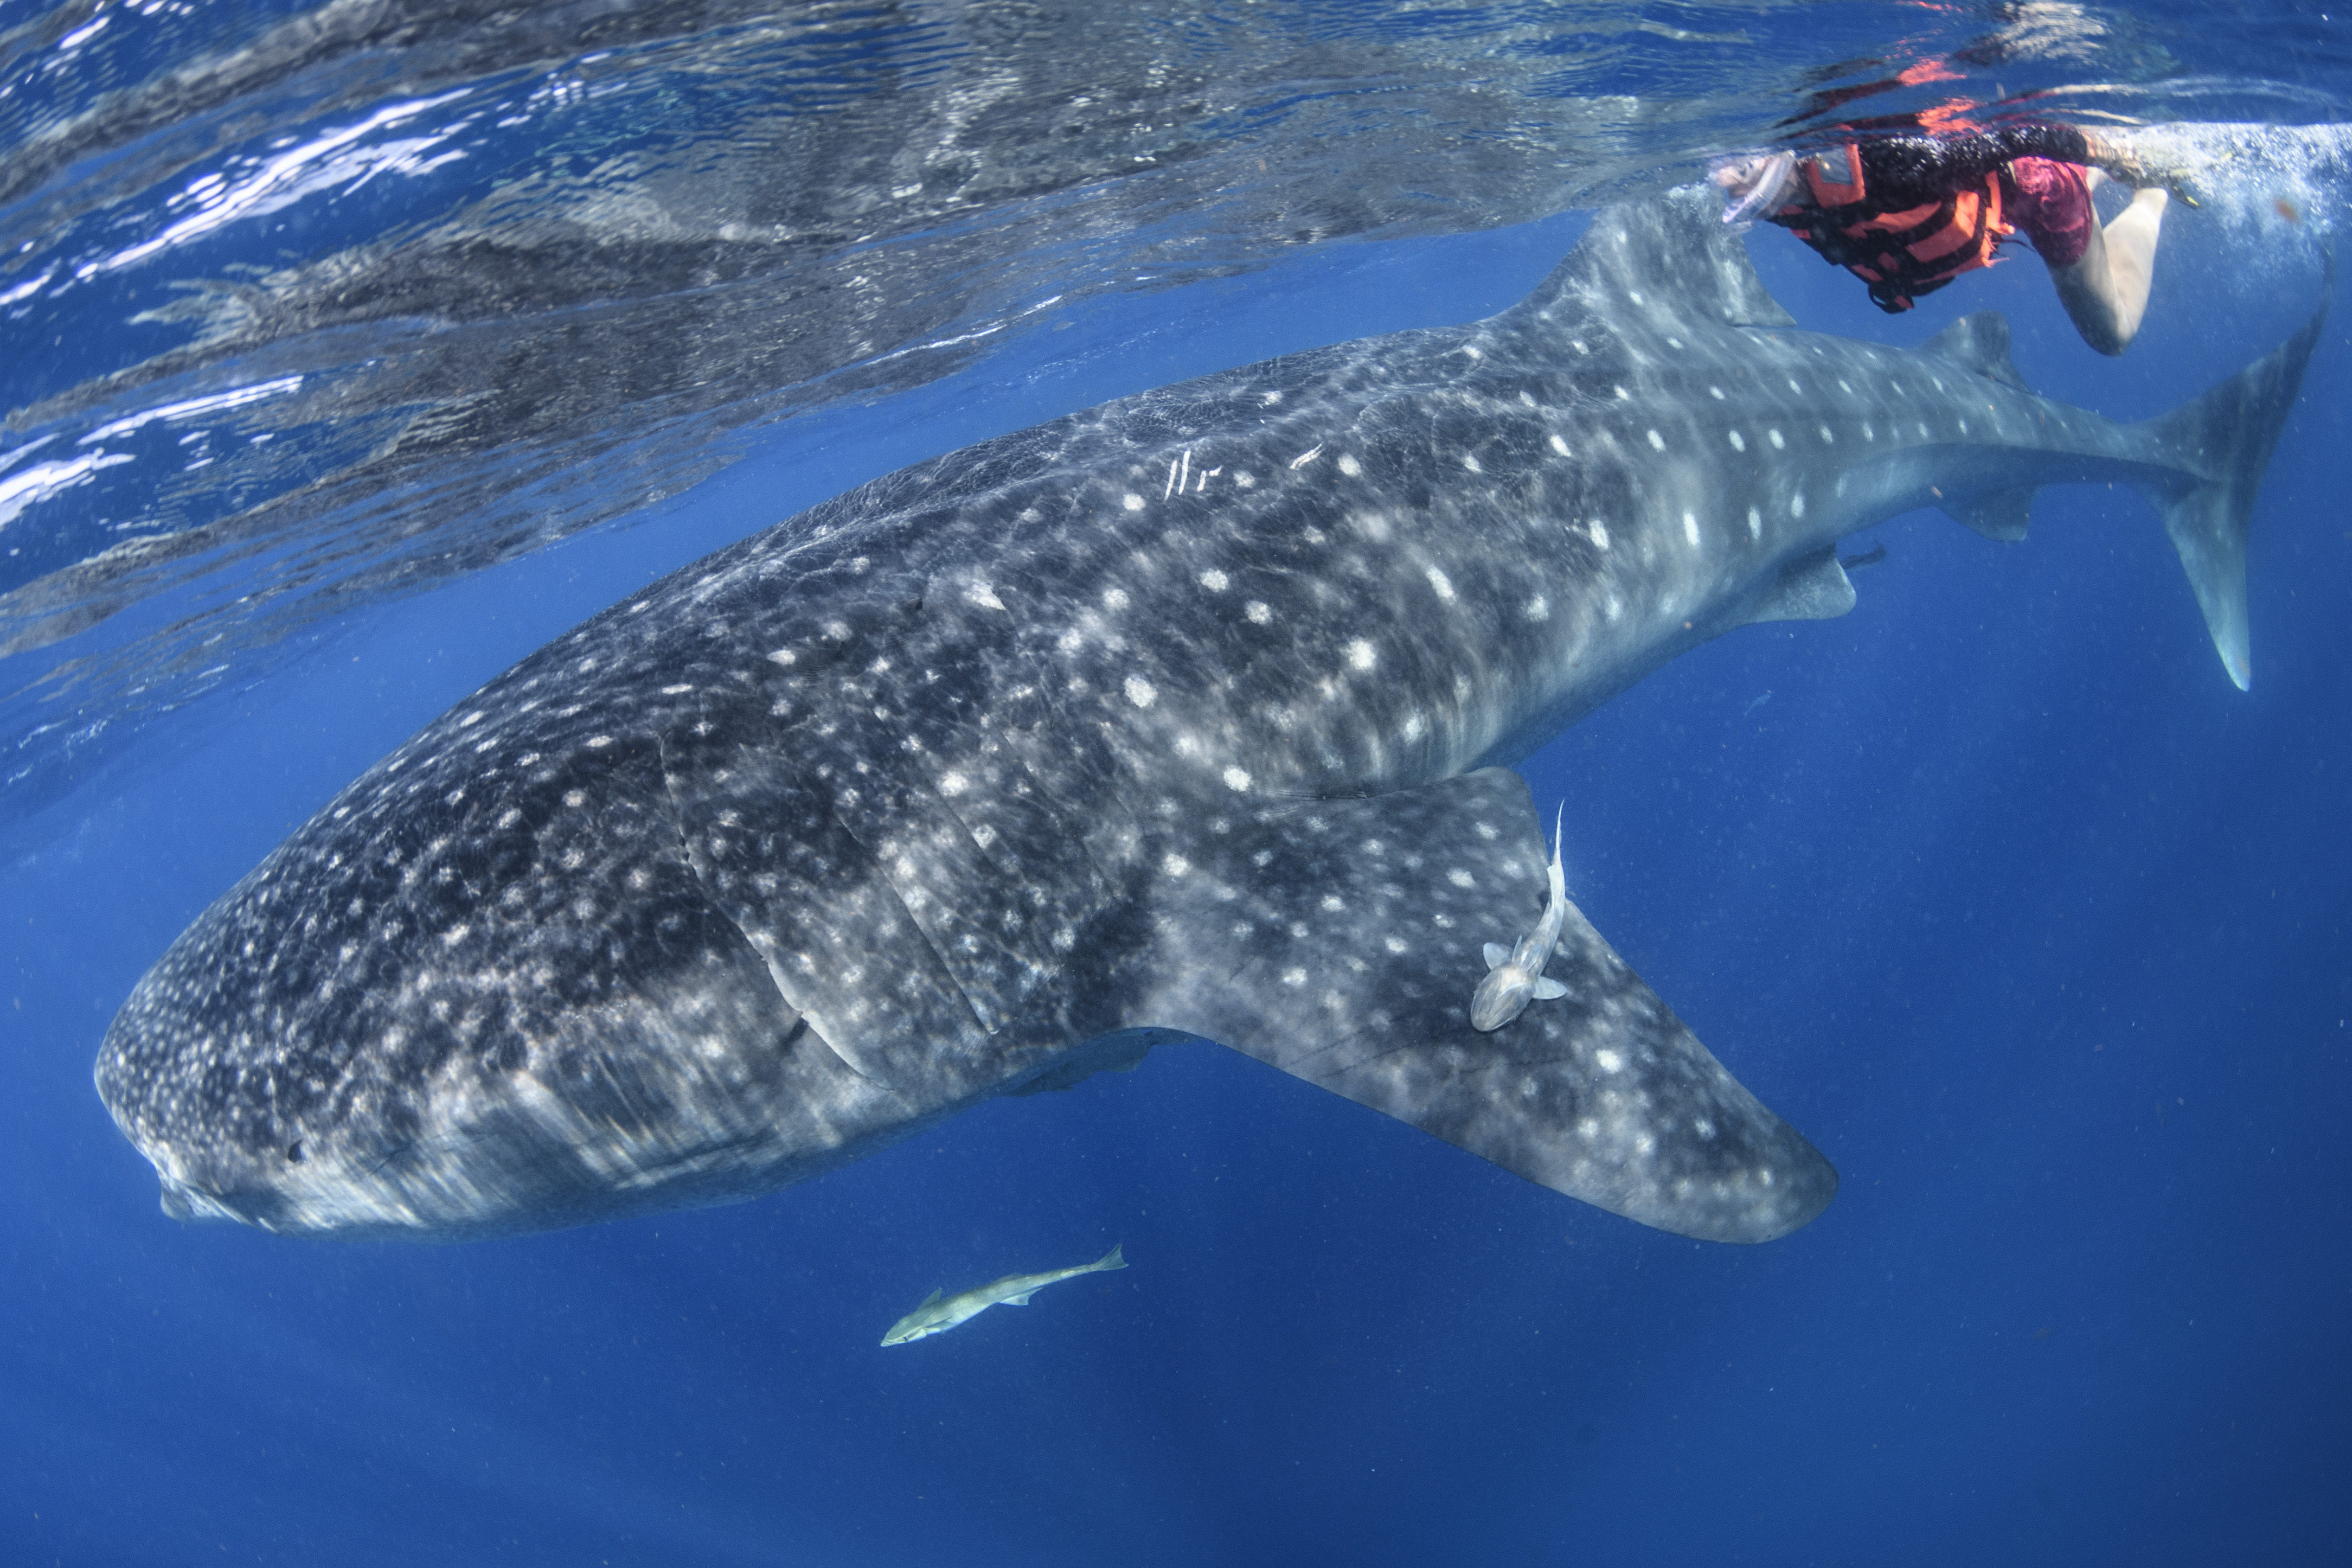 Snorkeling with whale sharks in Mexico